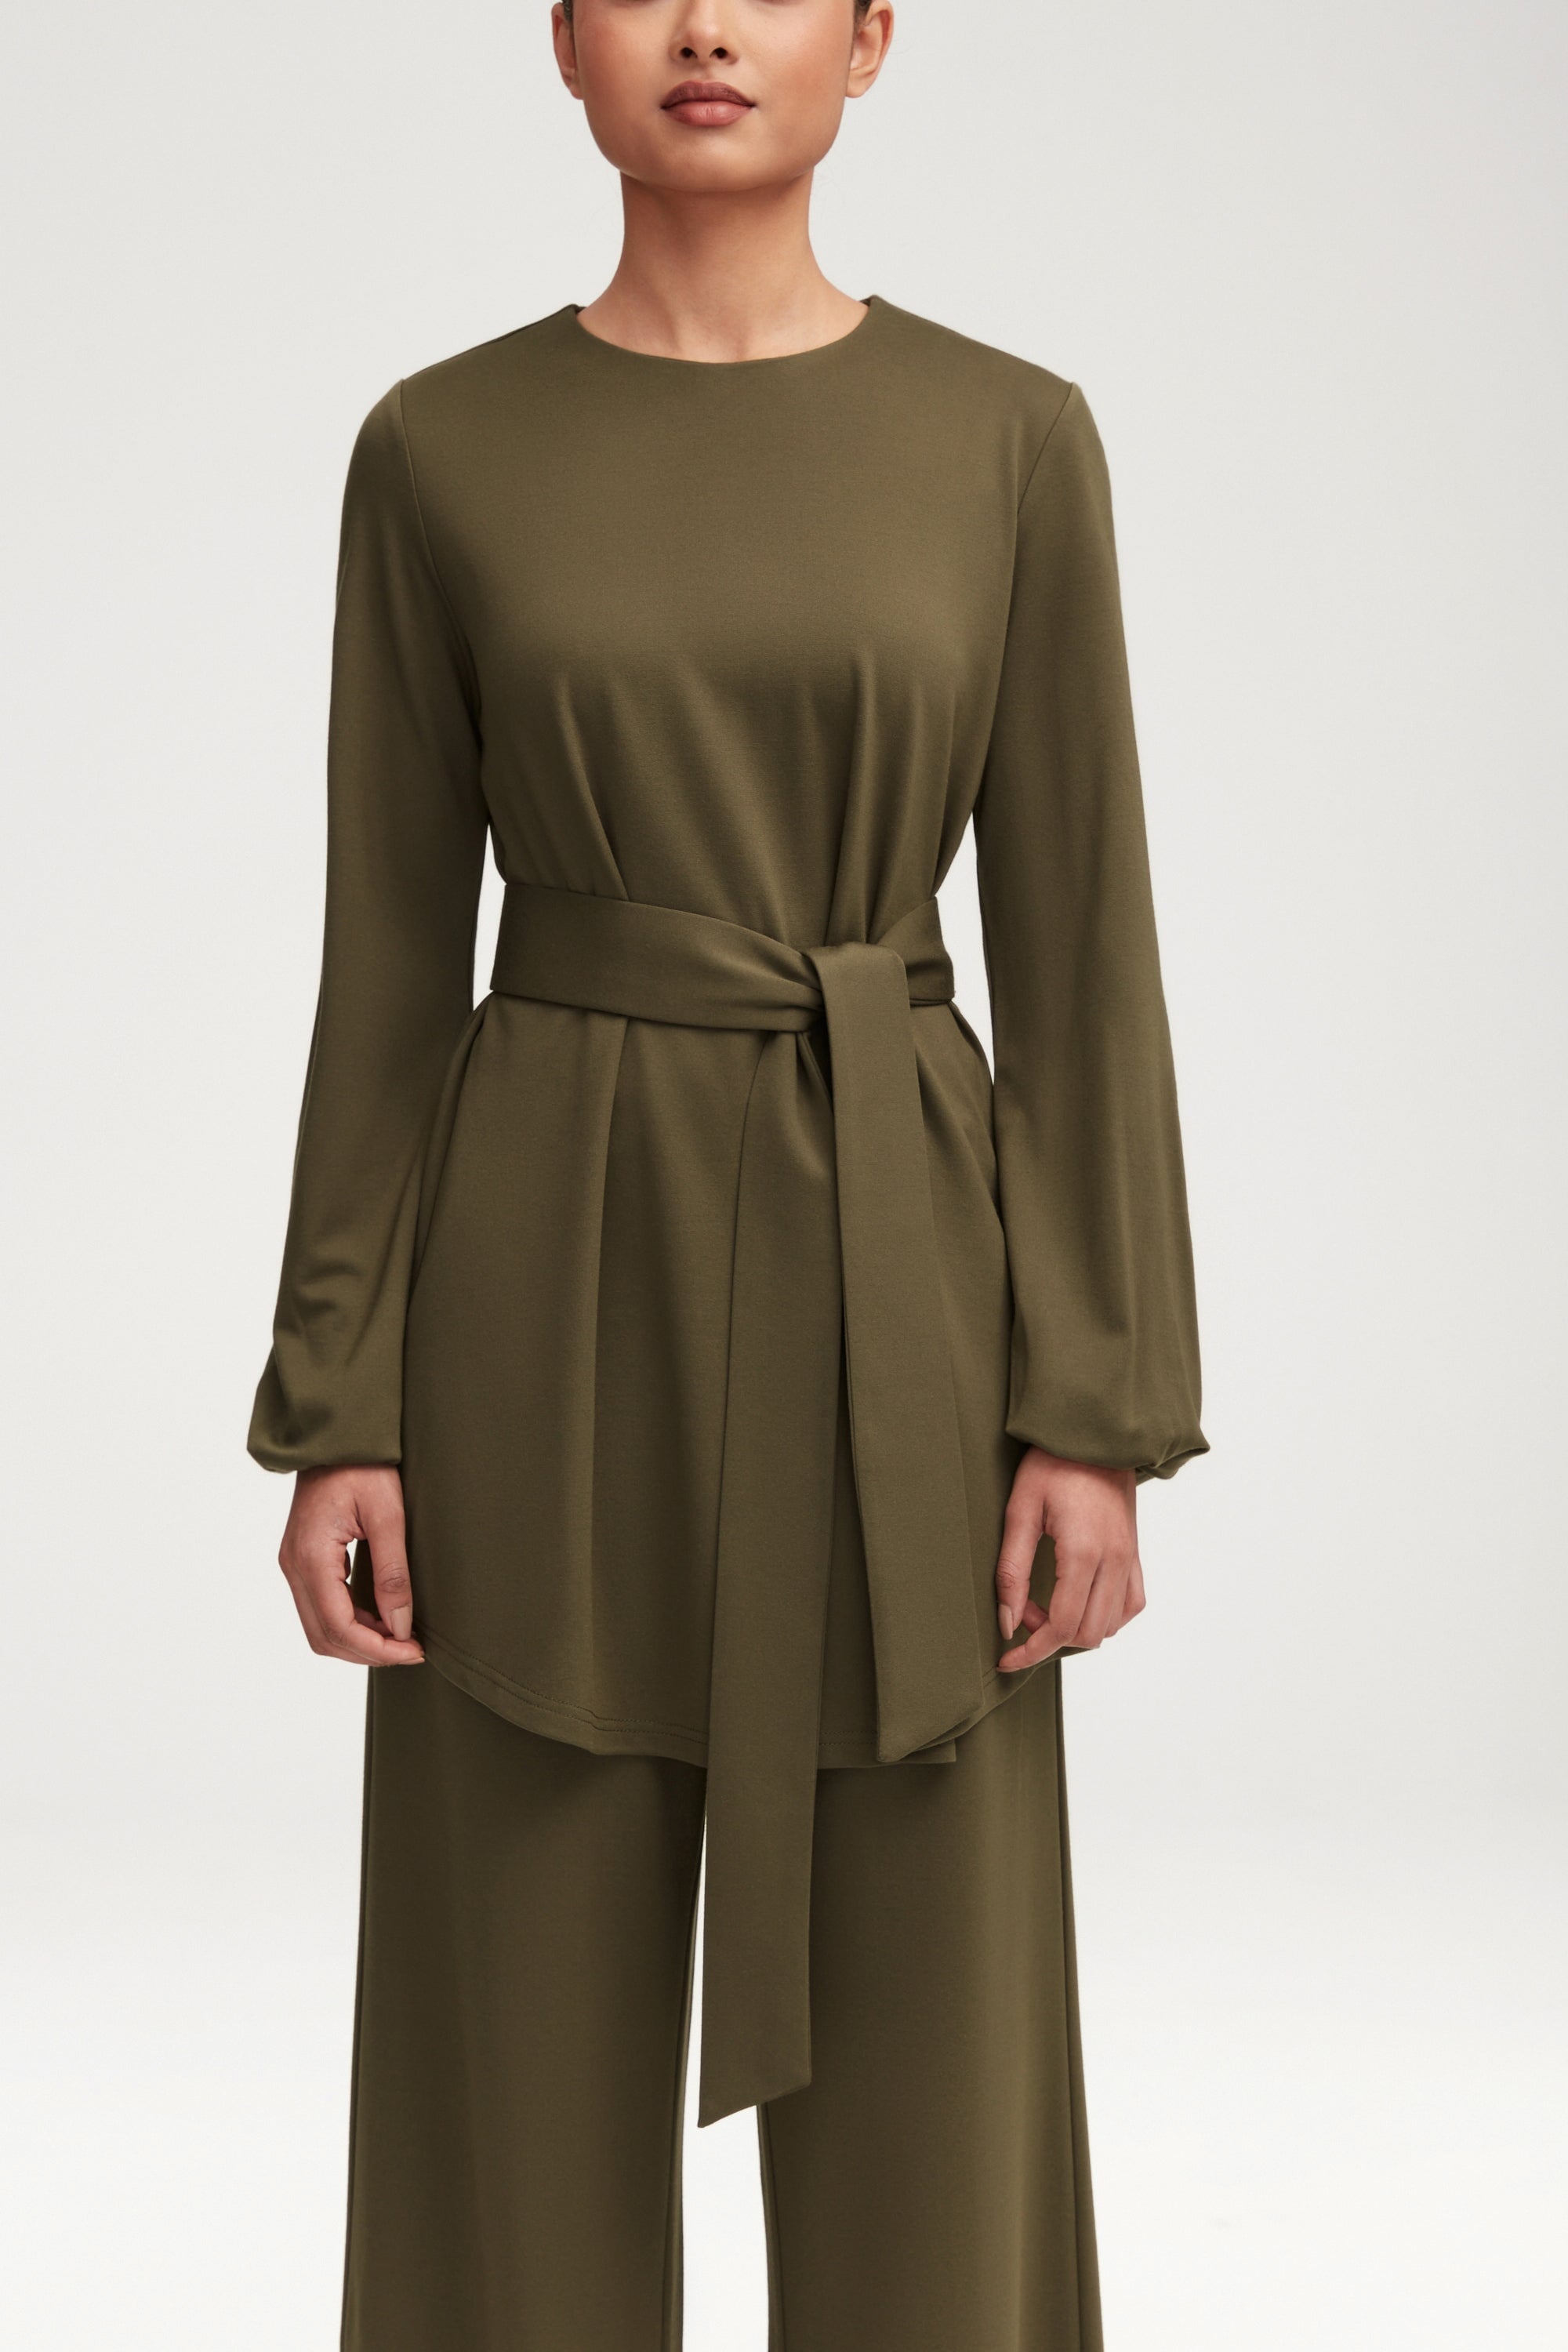 Fatima Everyday Belted Jersey Top - Olive Clothing Veiled 